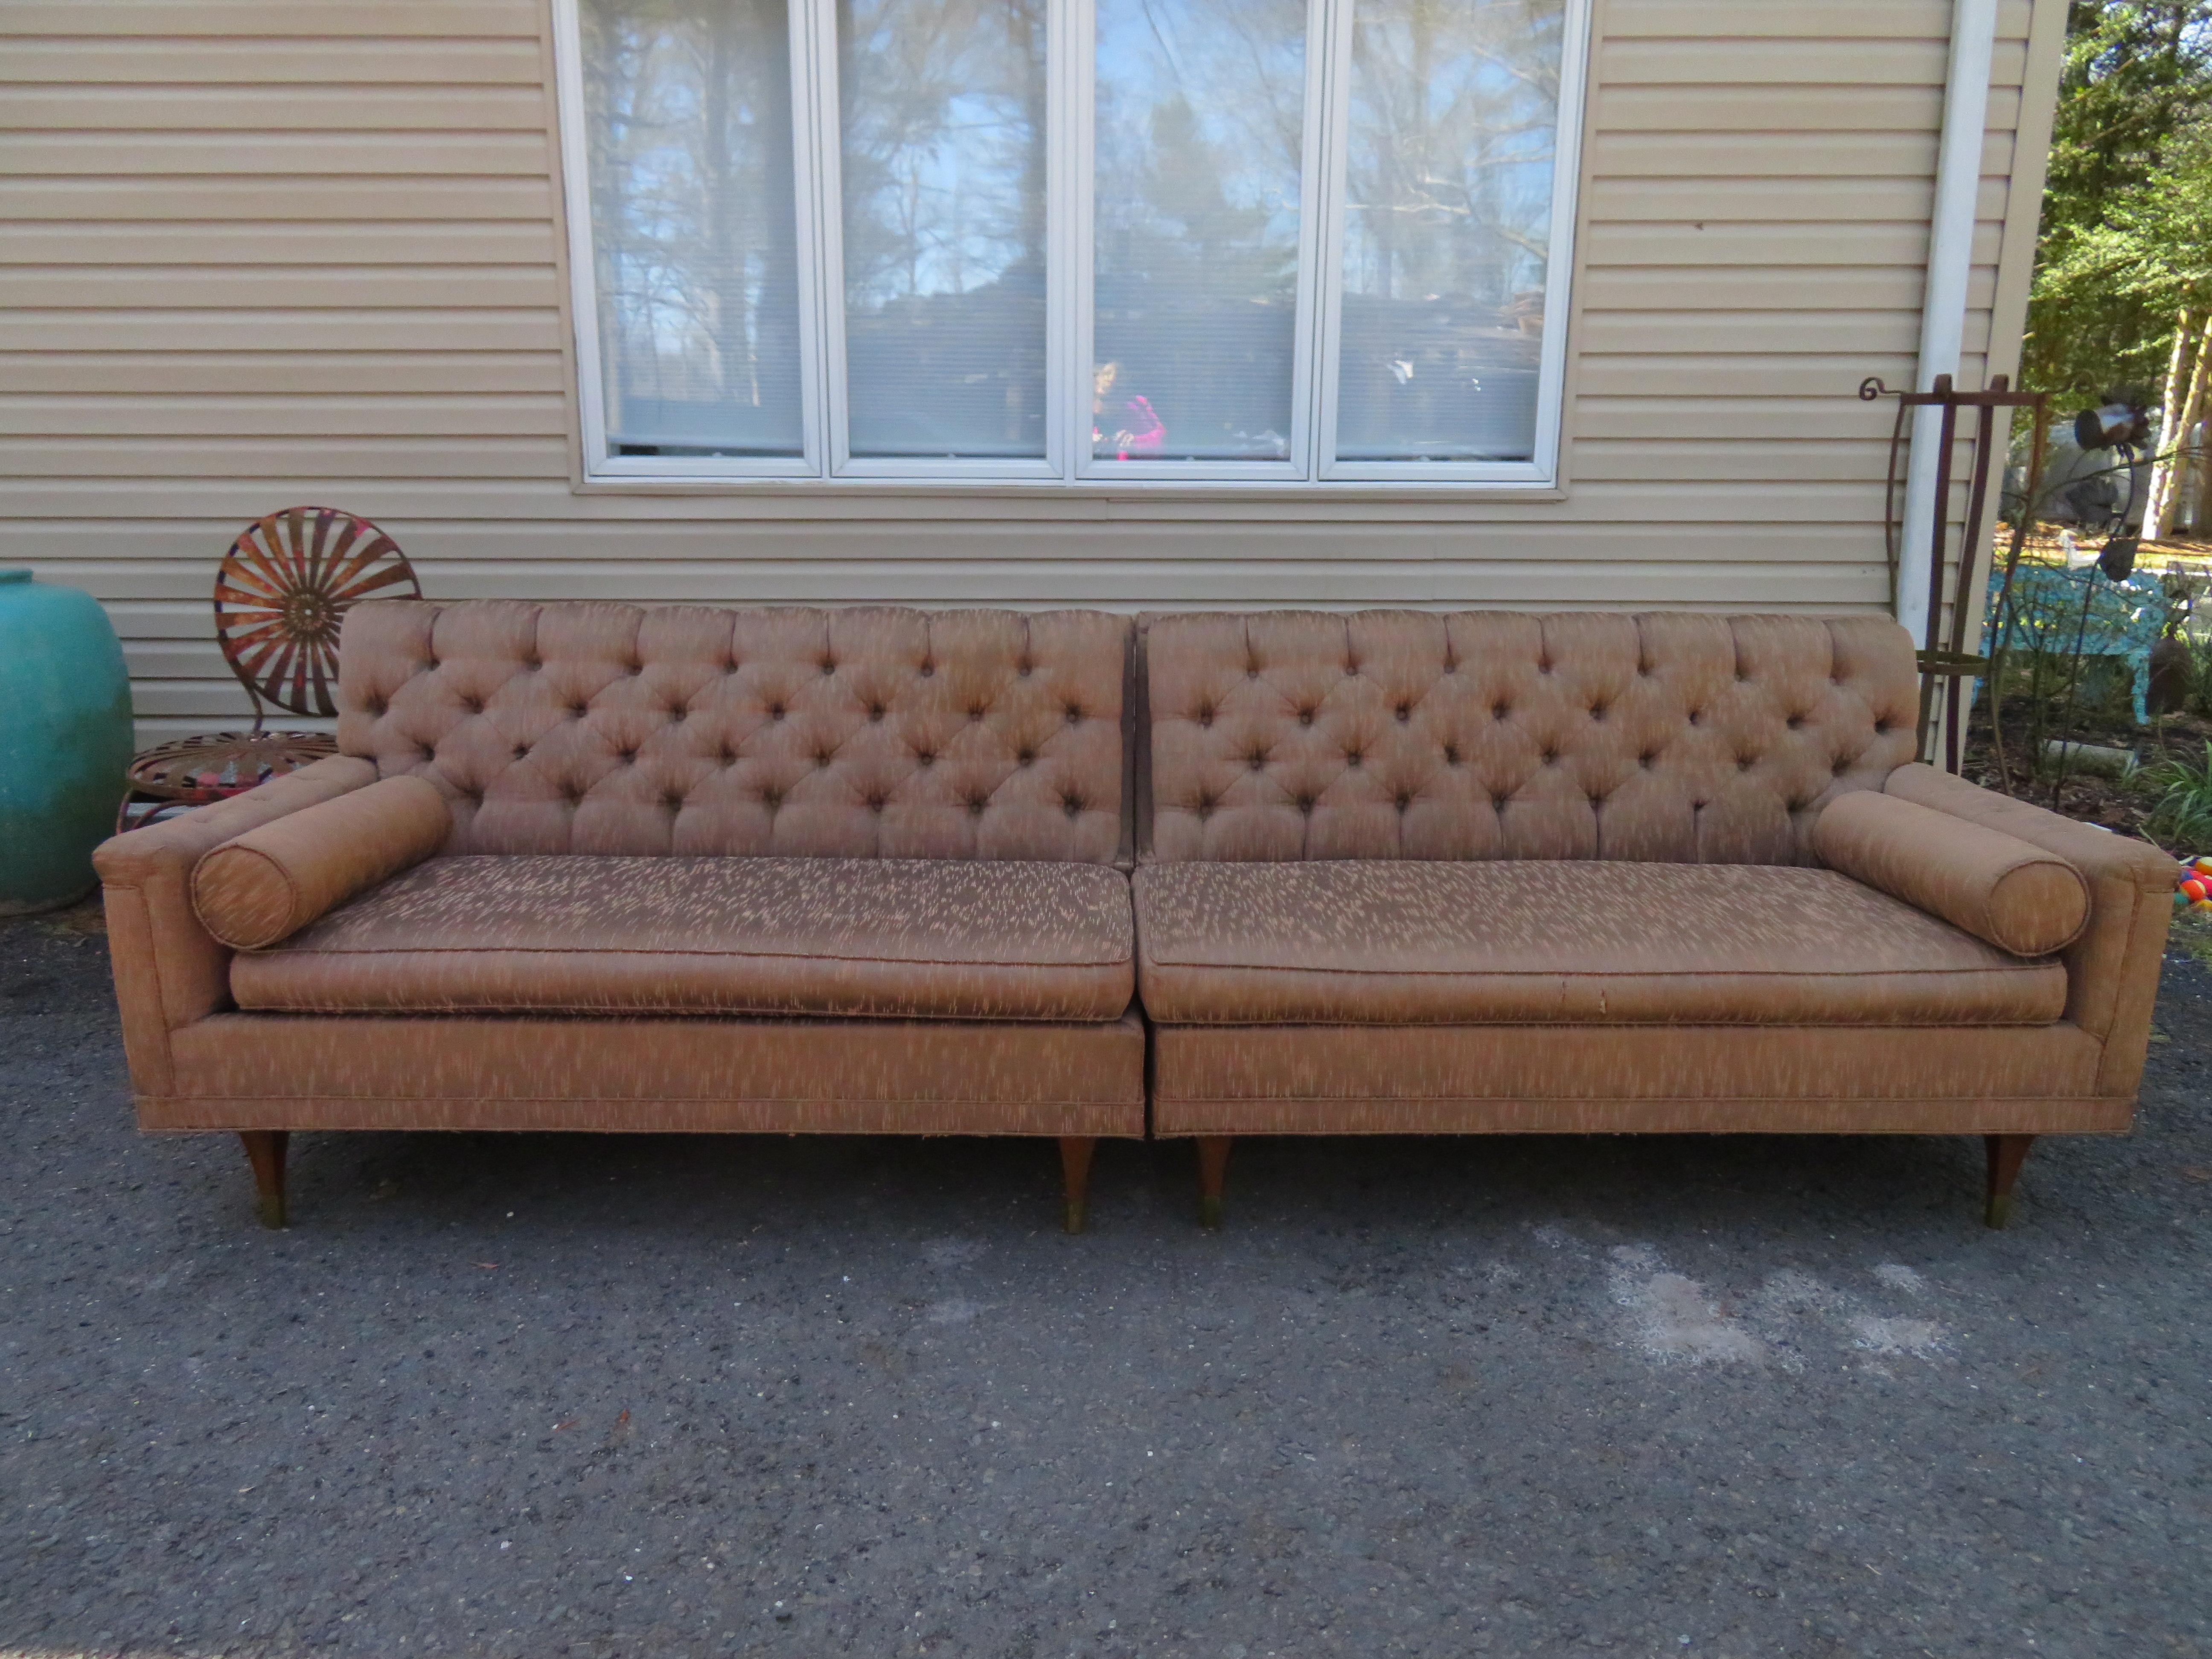 Ultra rare Karpen of California tufted back 2 piece sofa sectional. This super sexy sofa can be used as an L-shaped sectional or all lined up as a long sofa. We just flipped over the wonderful modern walnut legs with brass sabots-see photos. This